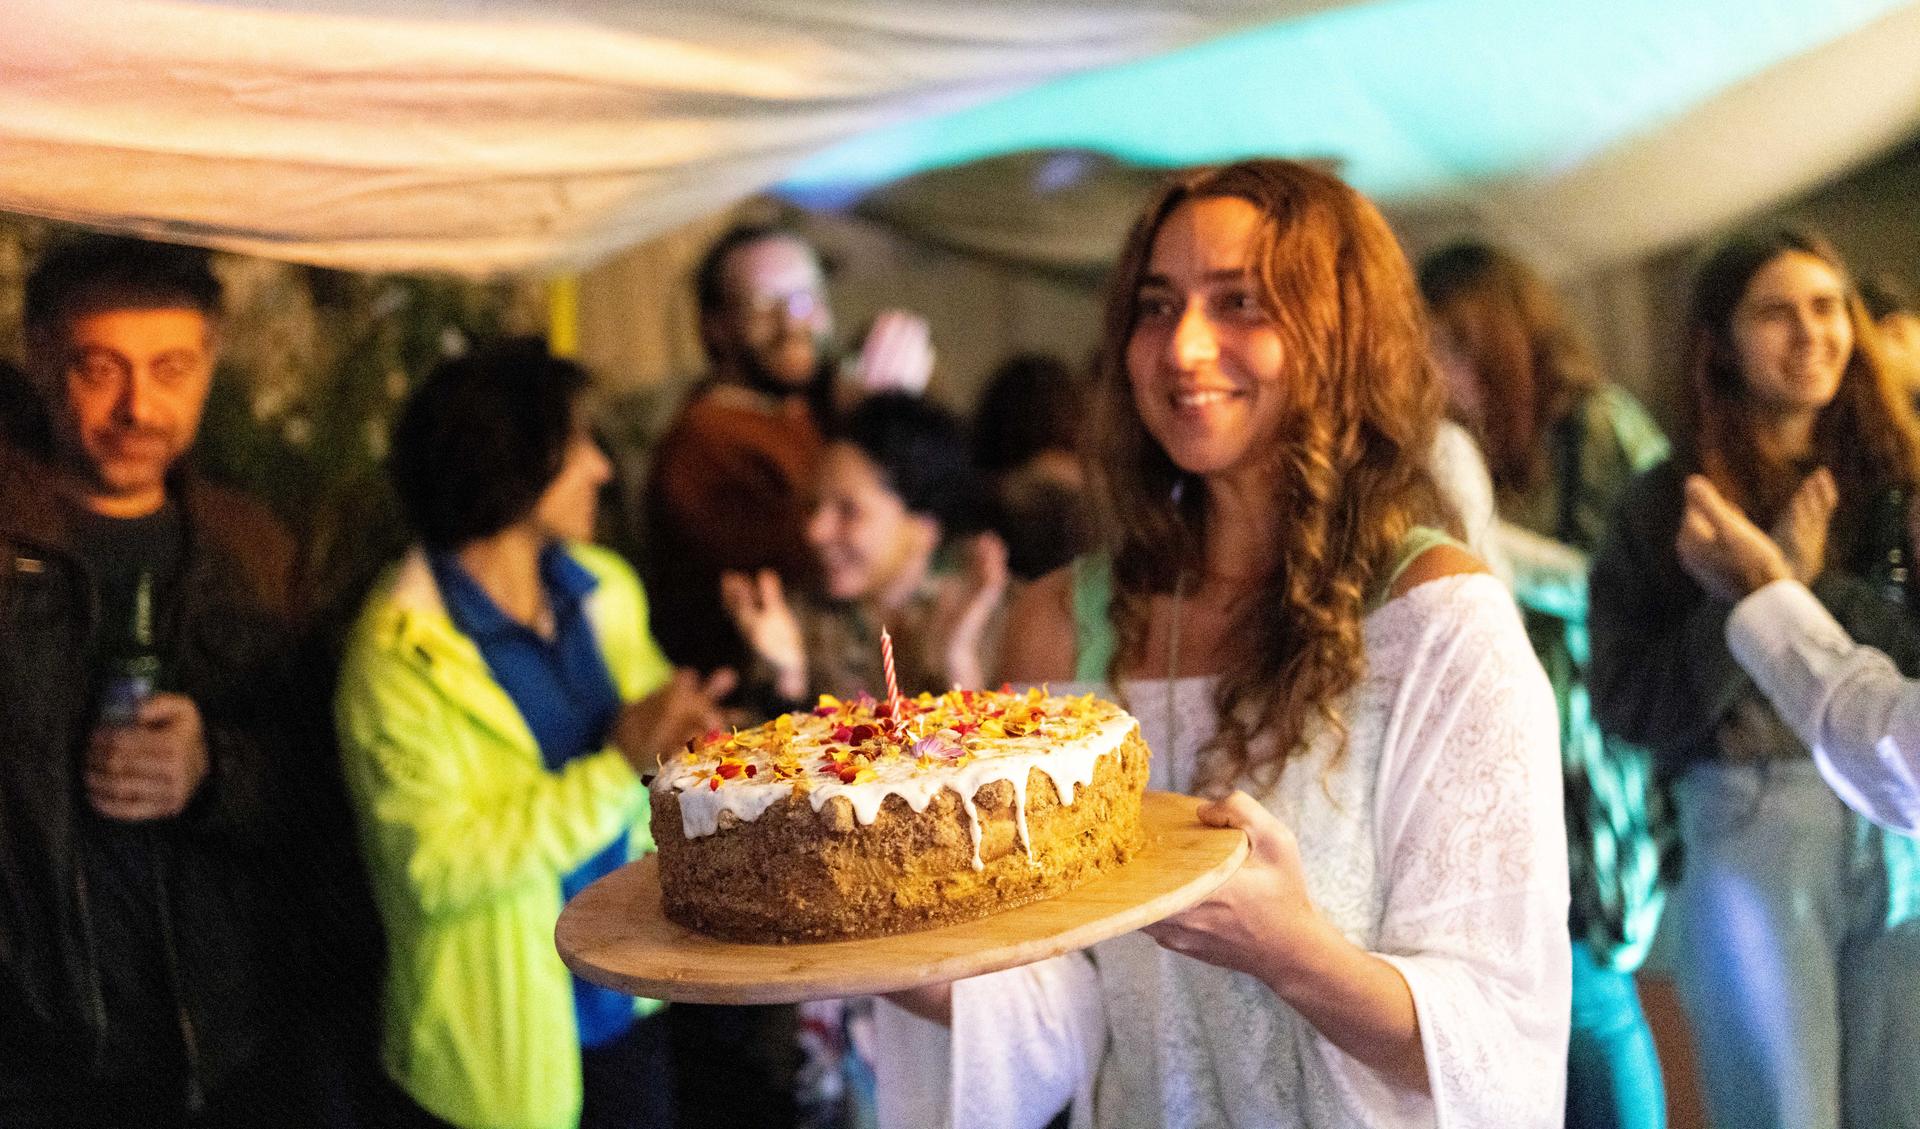 A person is carrying a birthday cake in a room that is full with people.